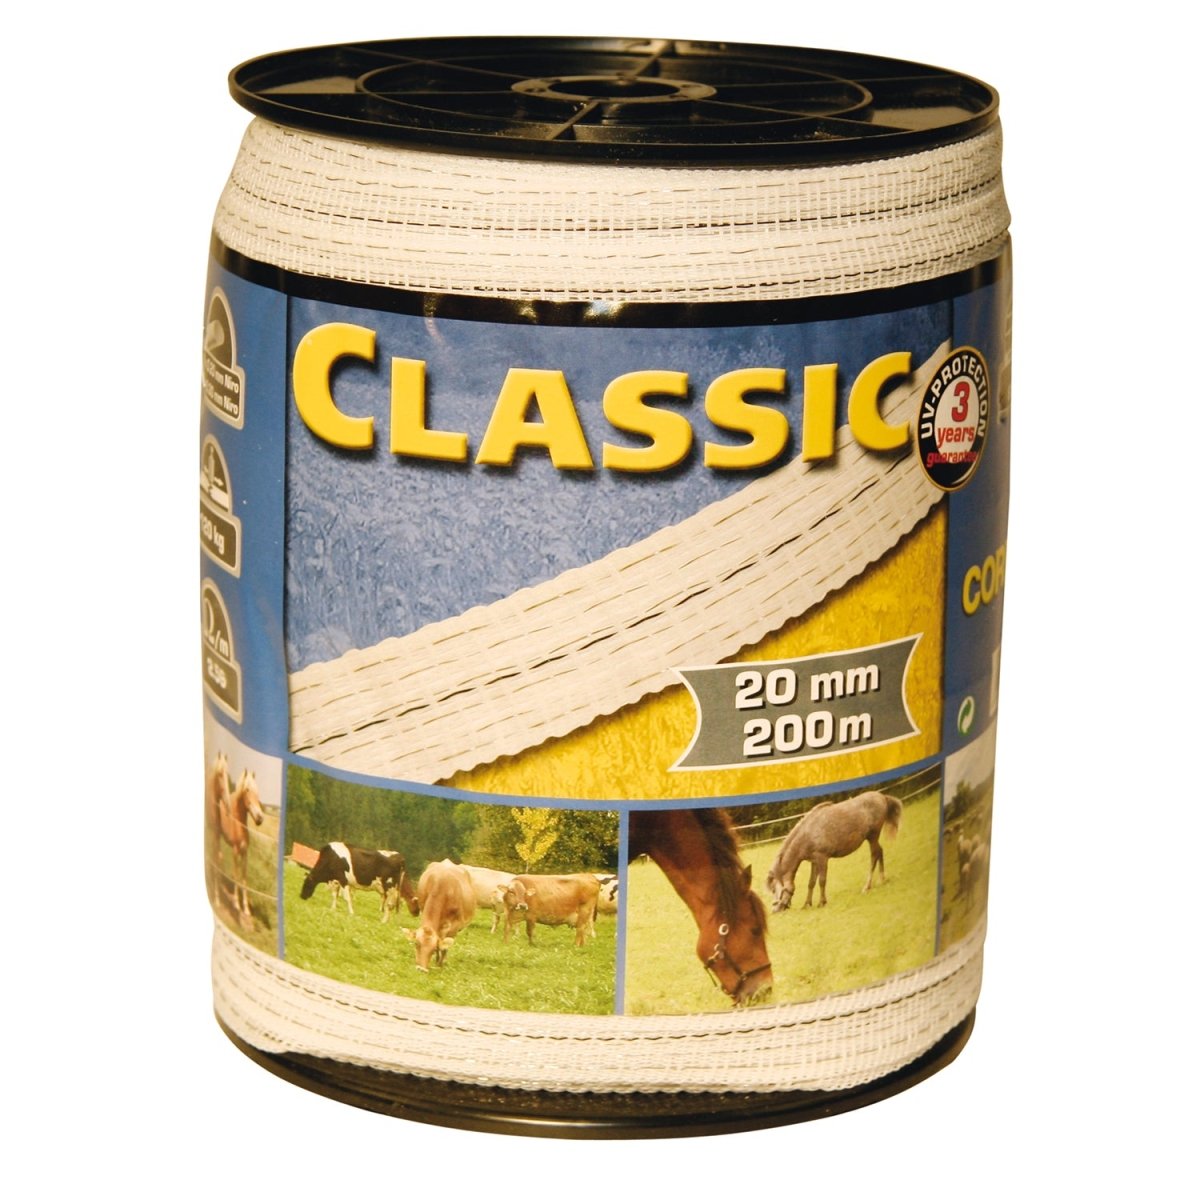 Corral Classic Fencing Tape - 200MX20Mm -